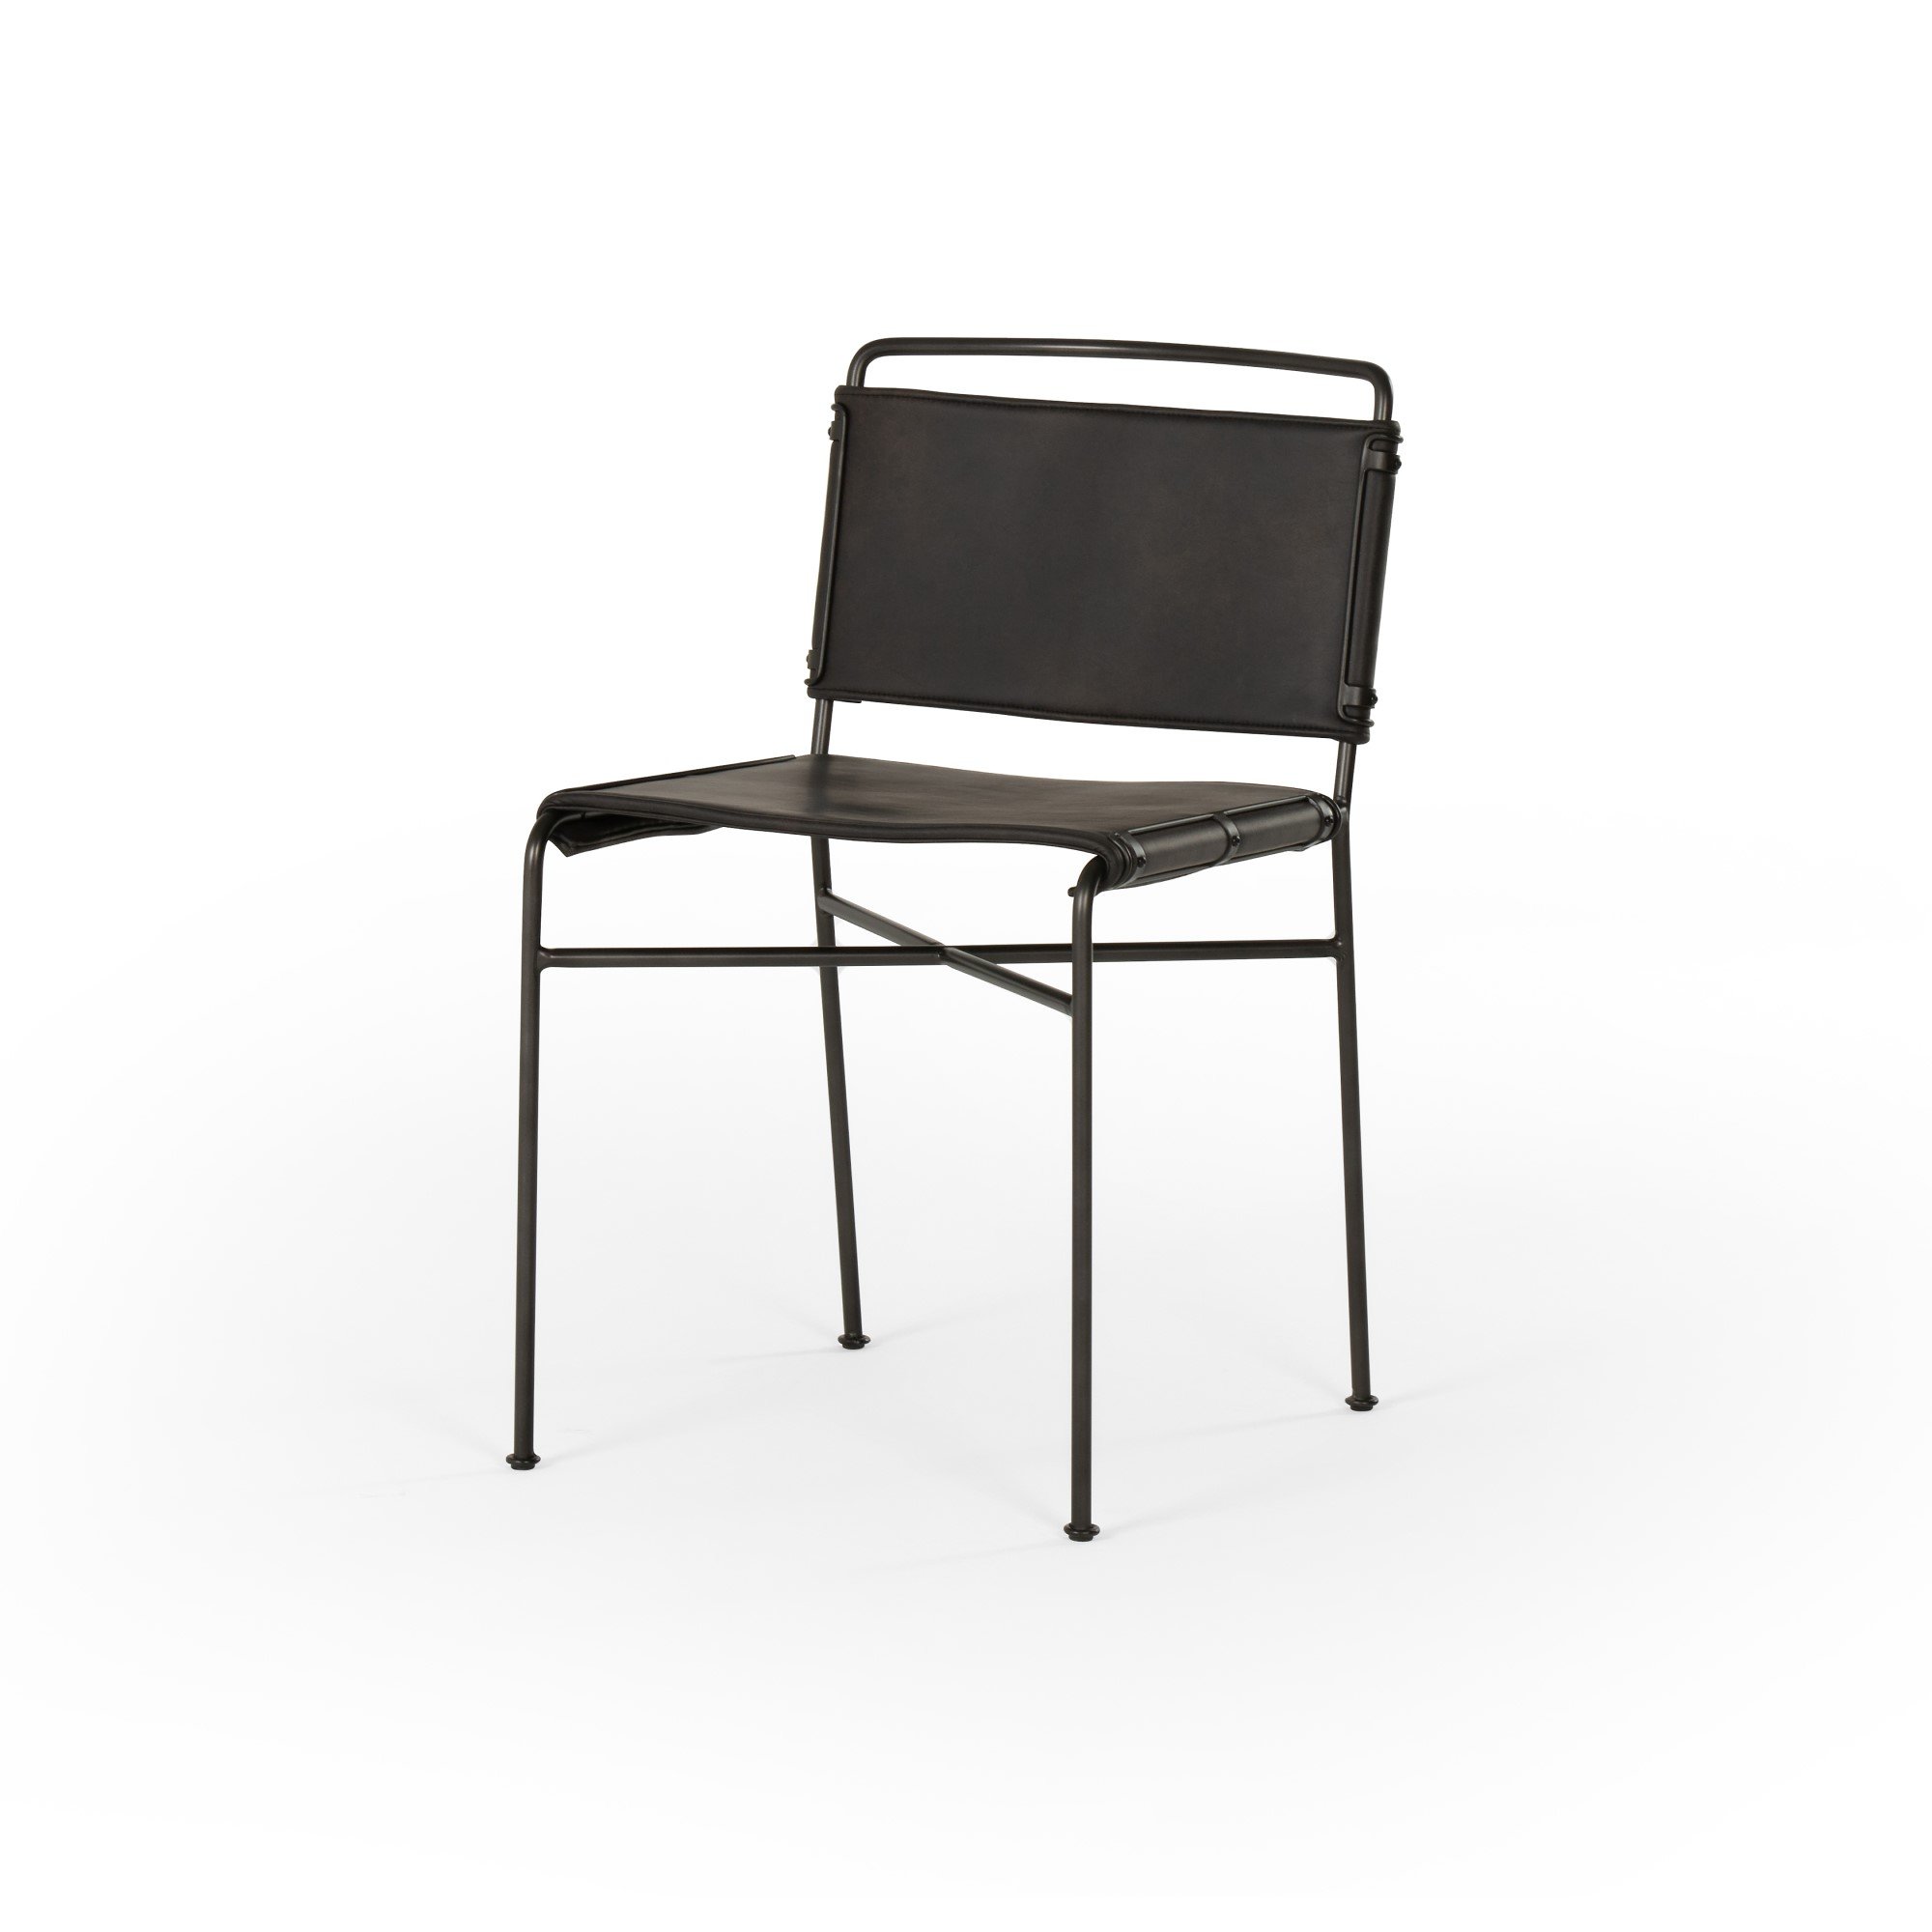 modern metal dining chair with distressed black leather seat and back $499.00